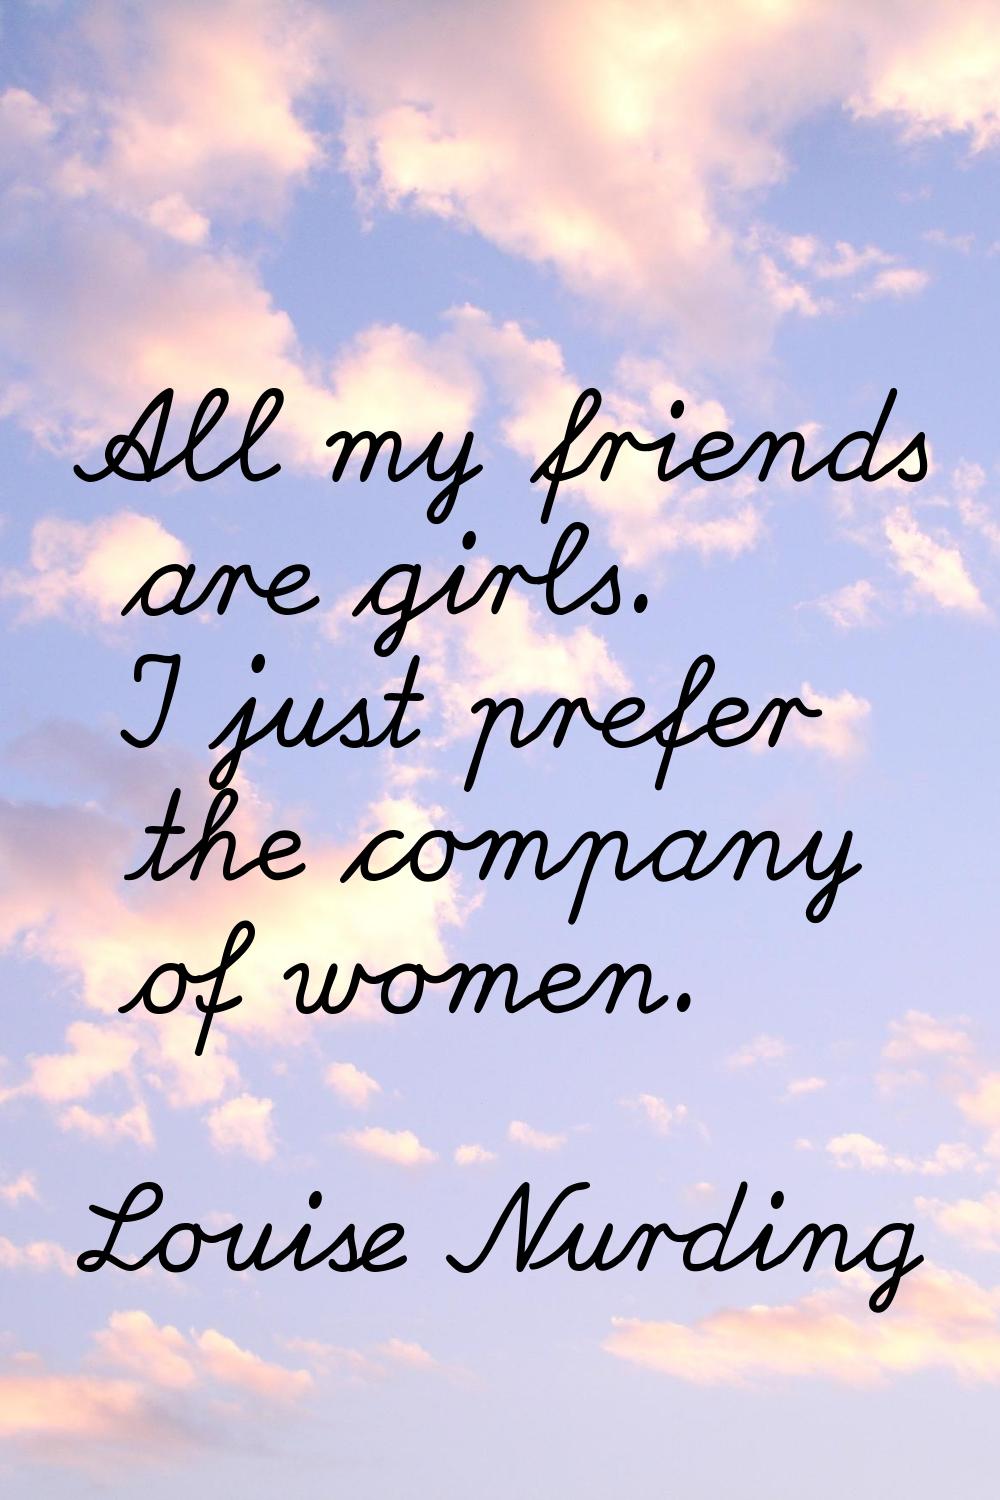 All my friends are girls. I just prefer the company of women.